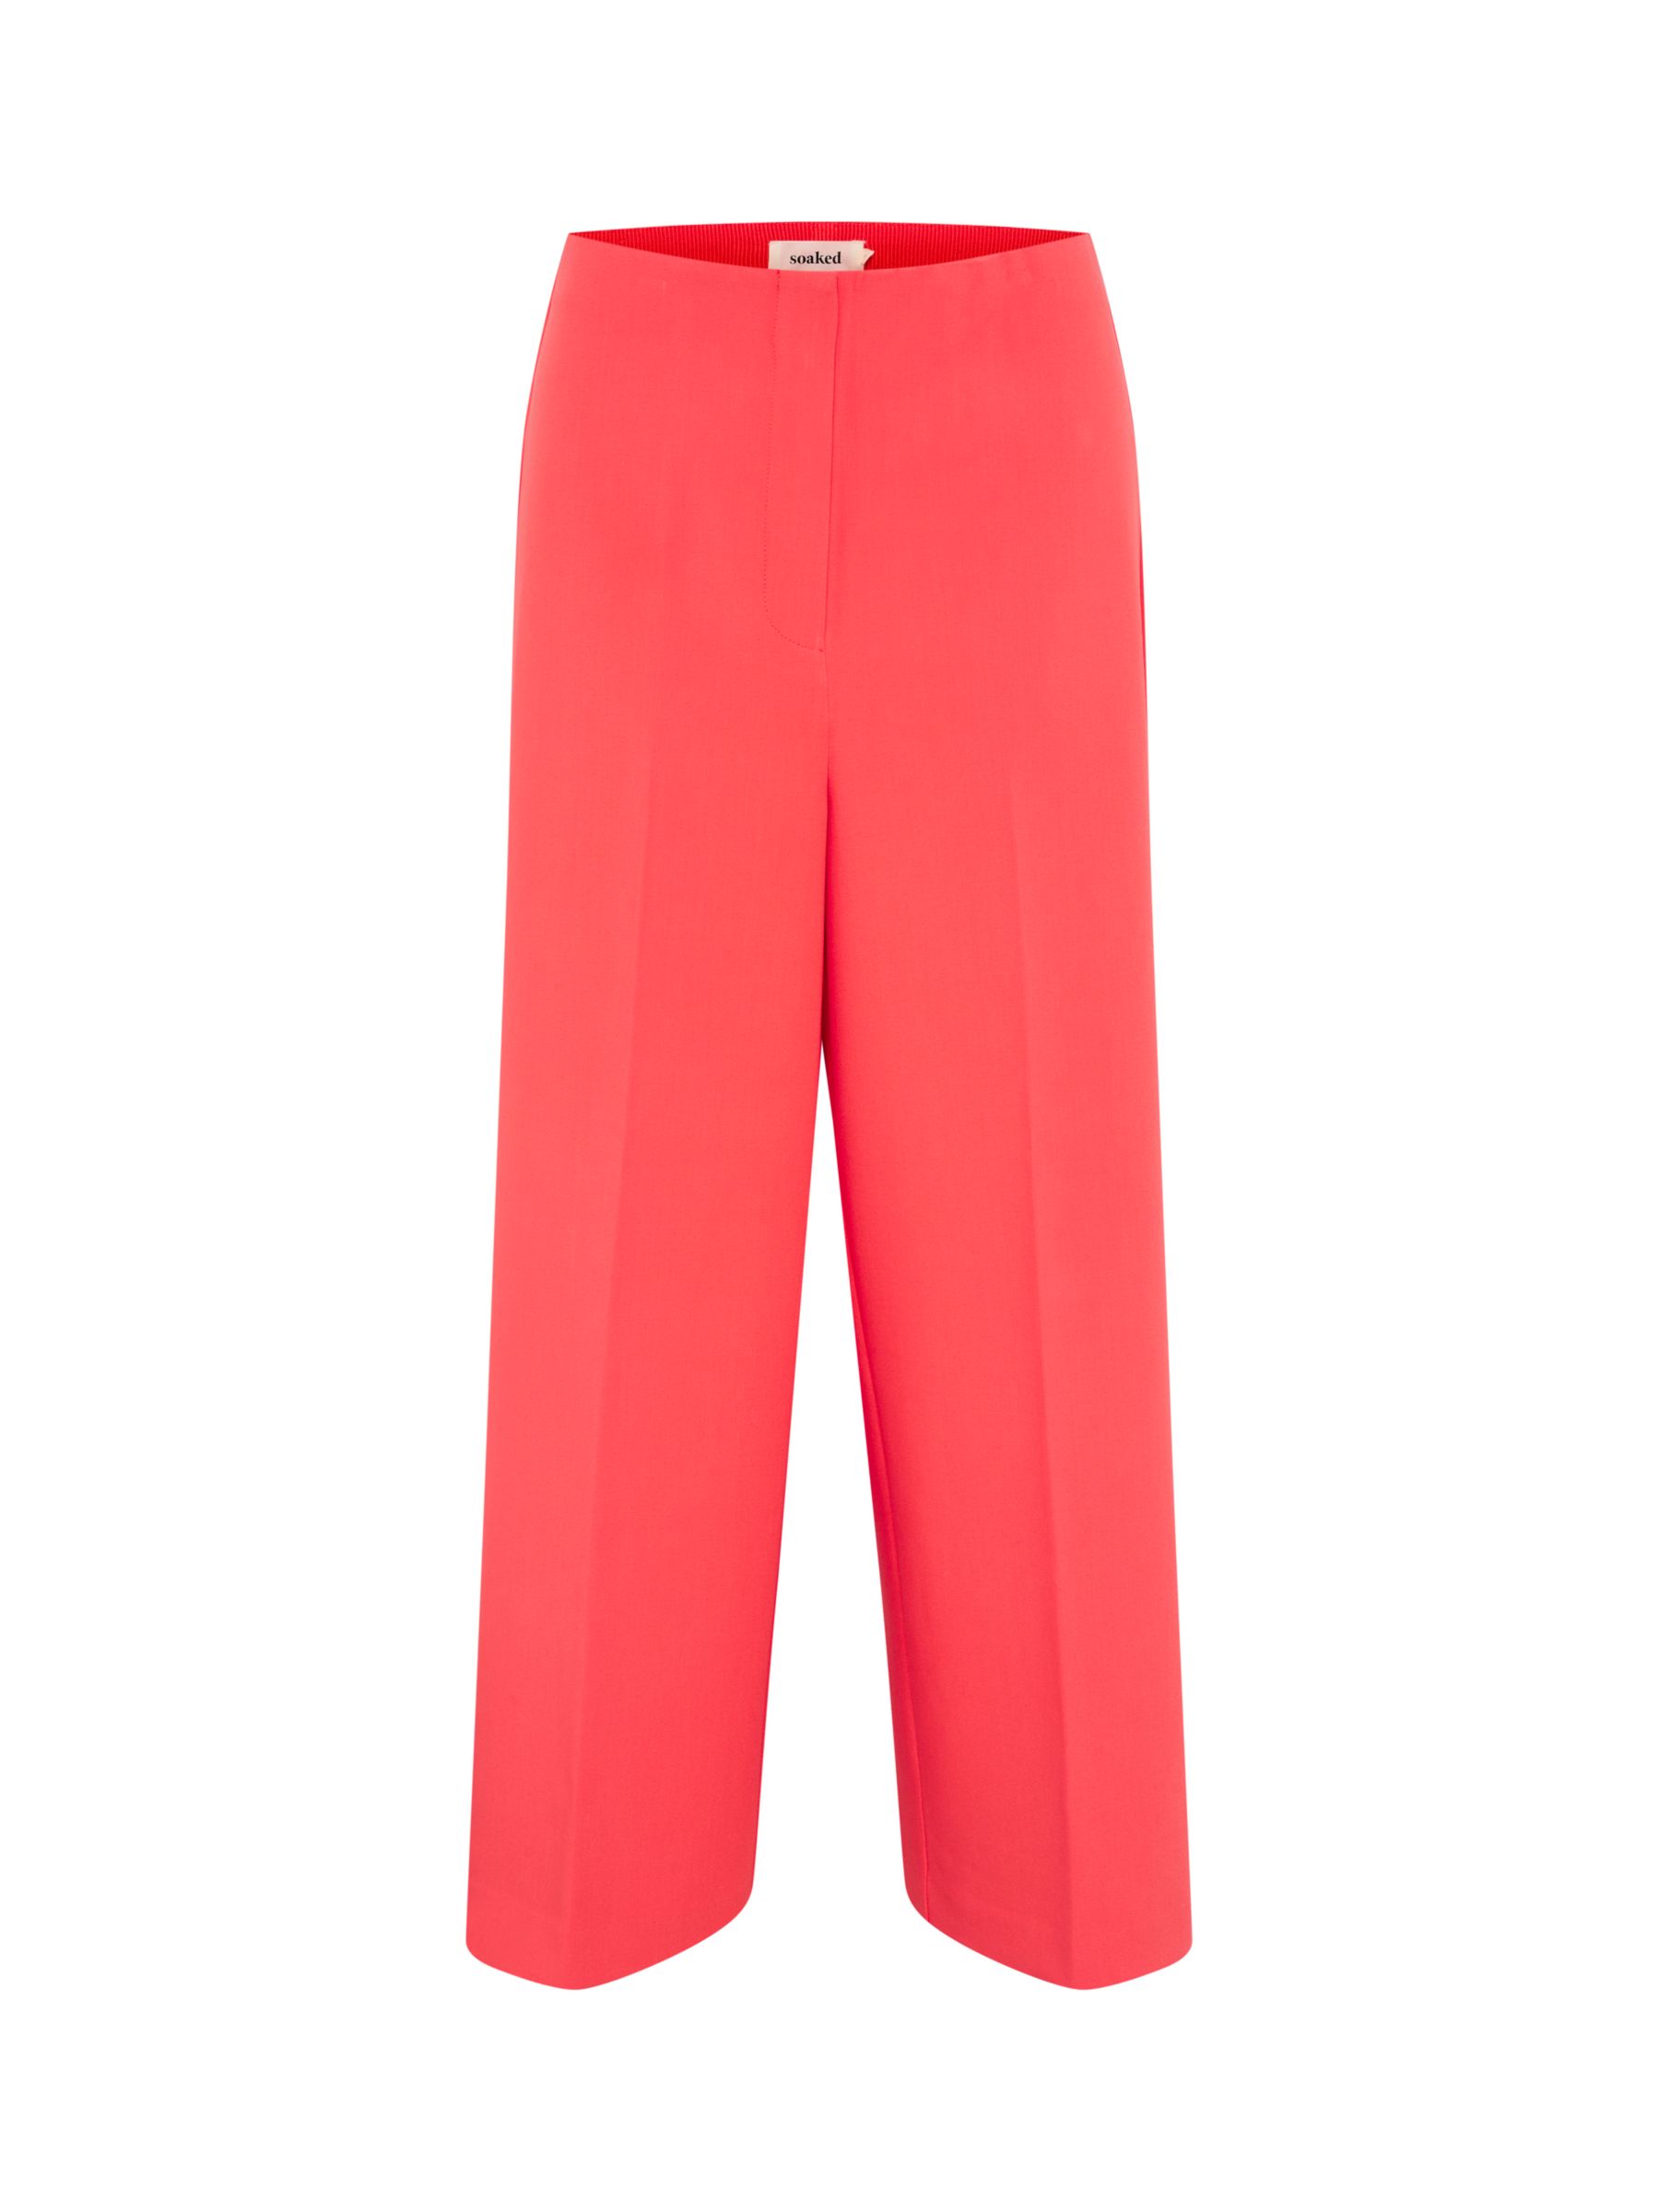 Soaked In Luxury Corinne High Waist Wide Legs Culottes Trousers, Hot Coral, XS